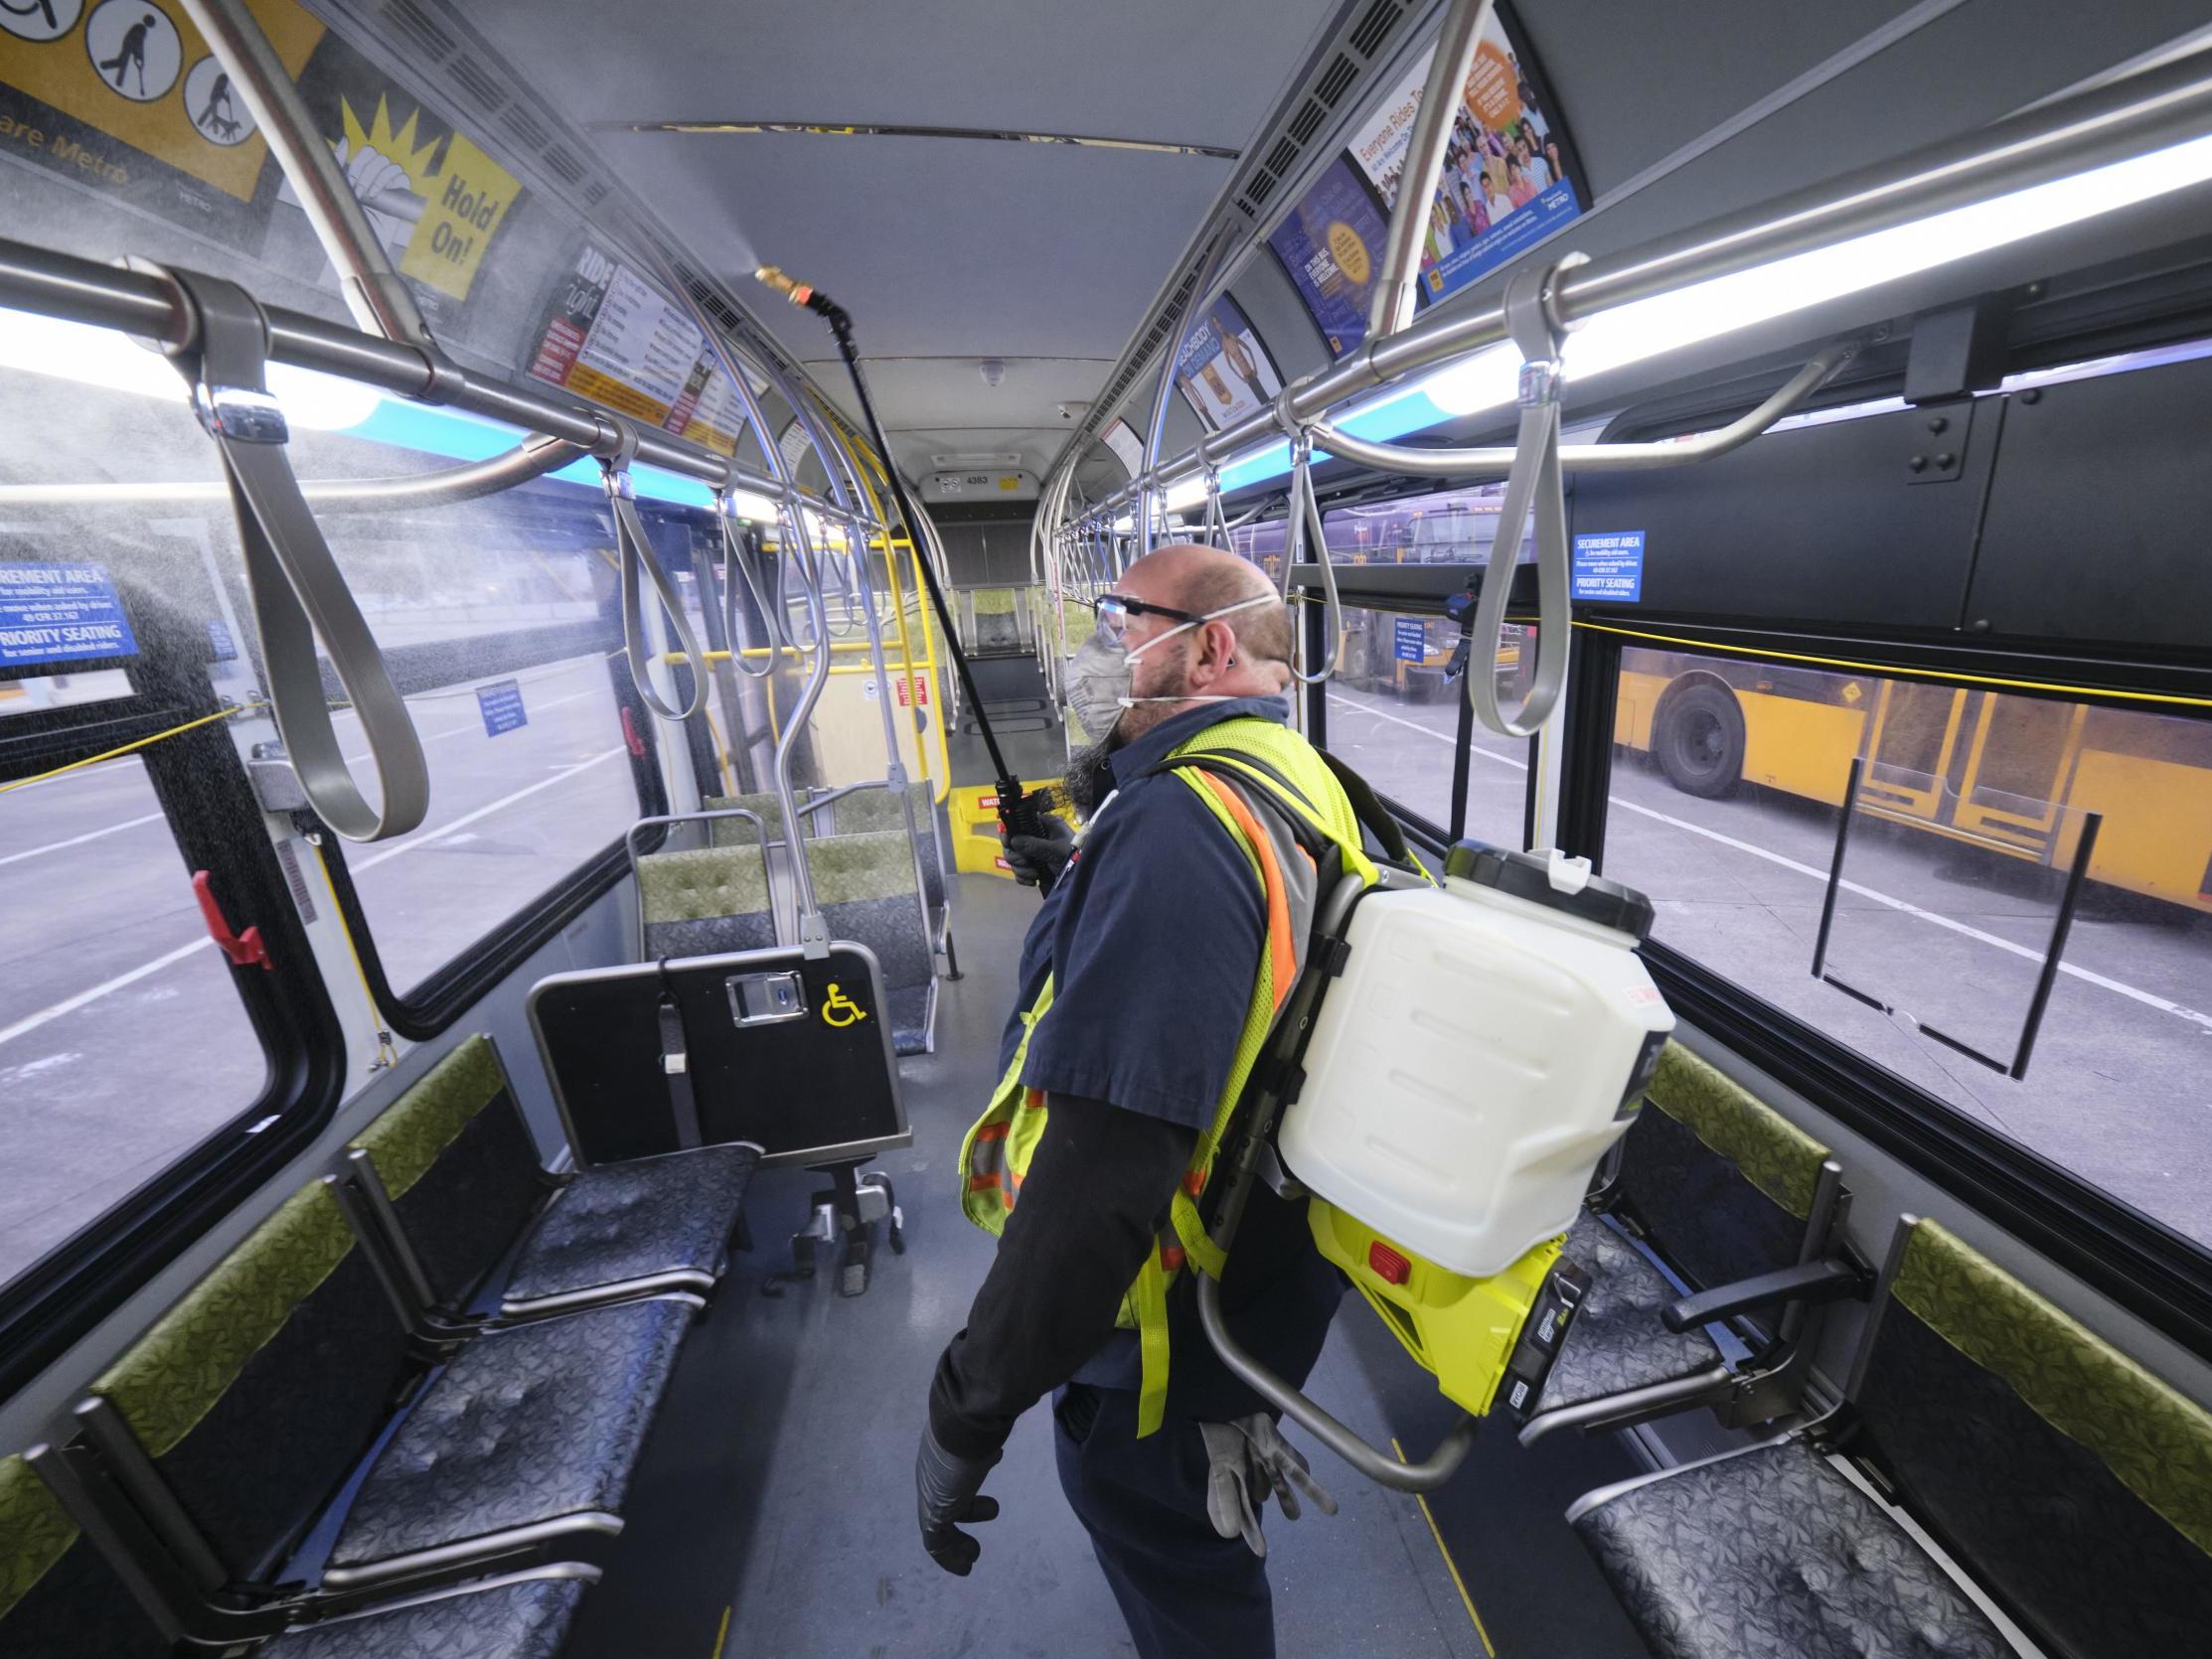 A Seattle bus is sprayed with disinfectant in response to the outbreak of Covid-19 in Washington state